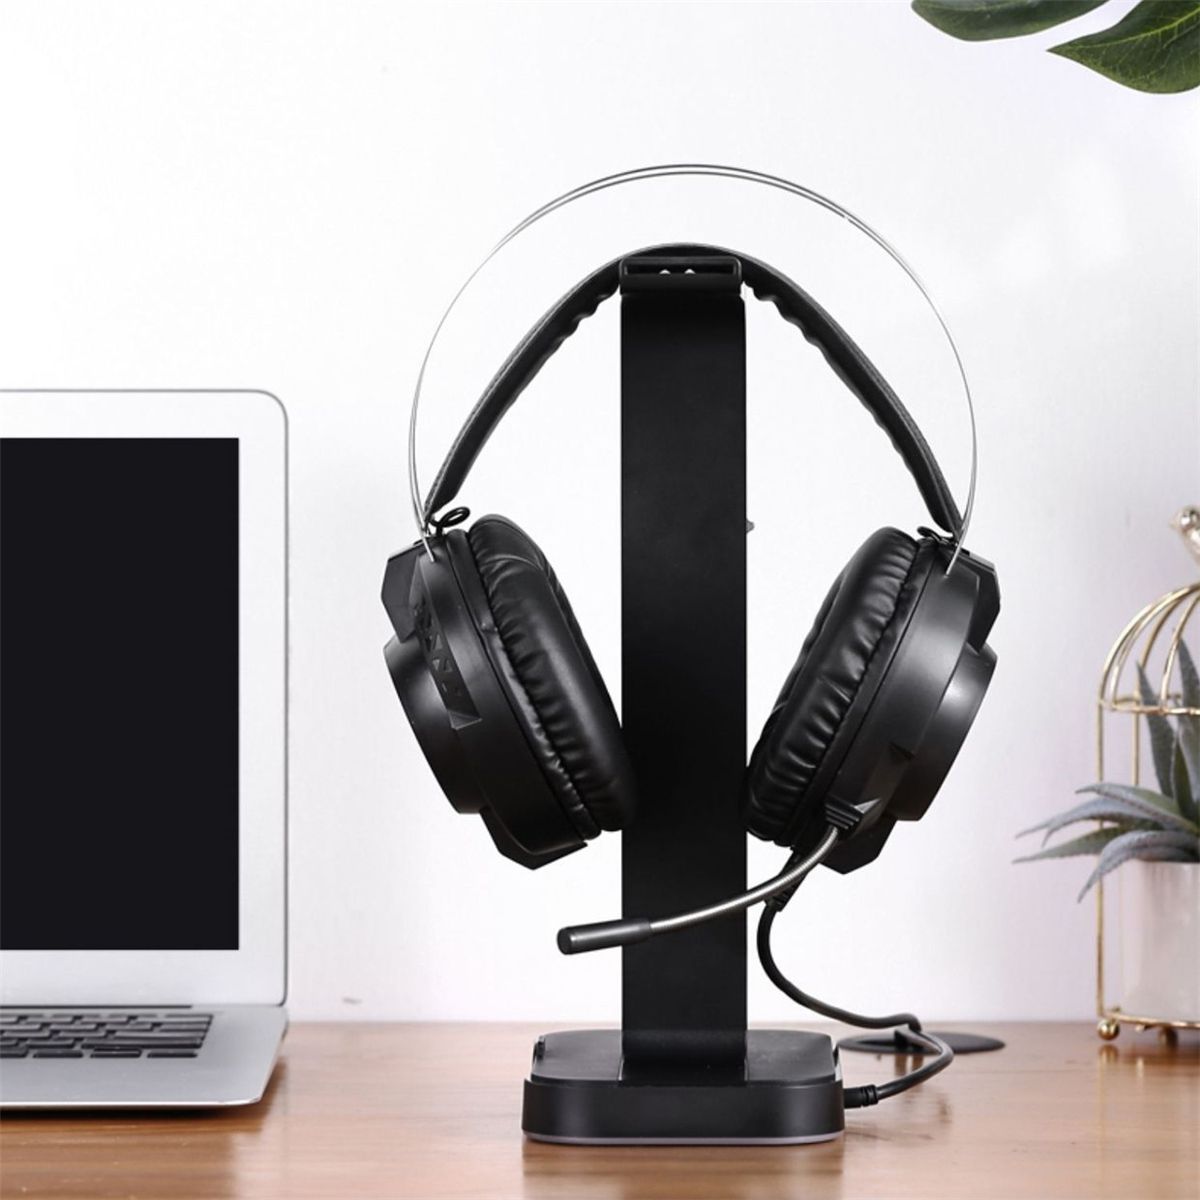 Inphic-H100-Headset-Stand-Dual-USB-Ports-Colorful-Light-Base-Headphone-Hanger-Headset-Mount-Holder-O-1742022